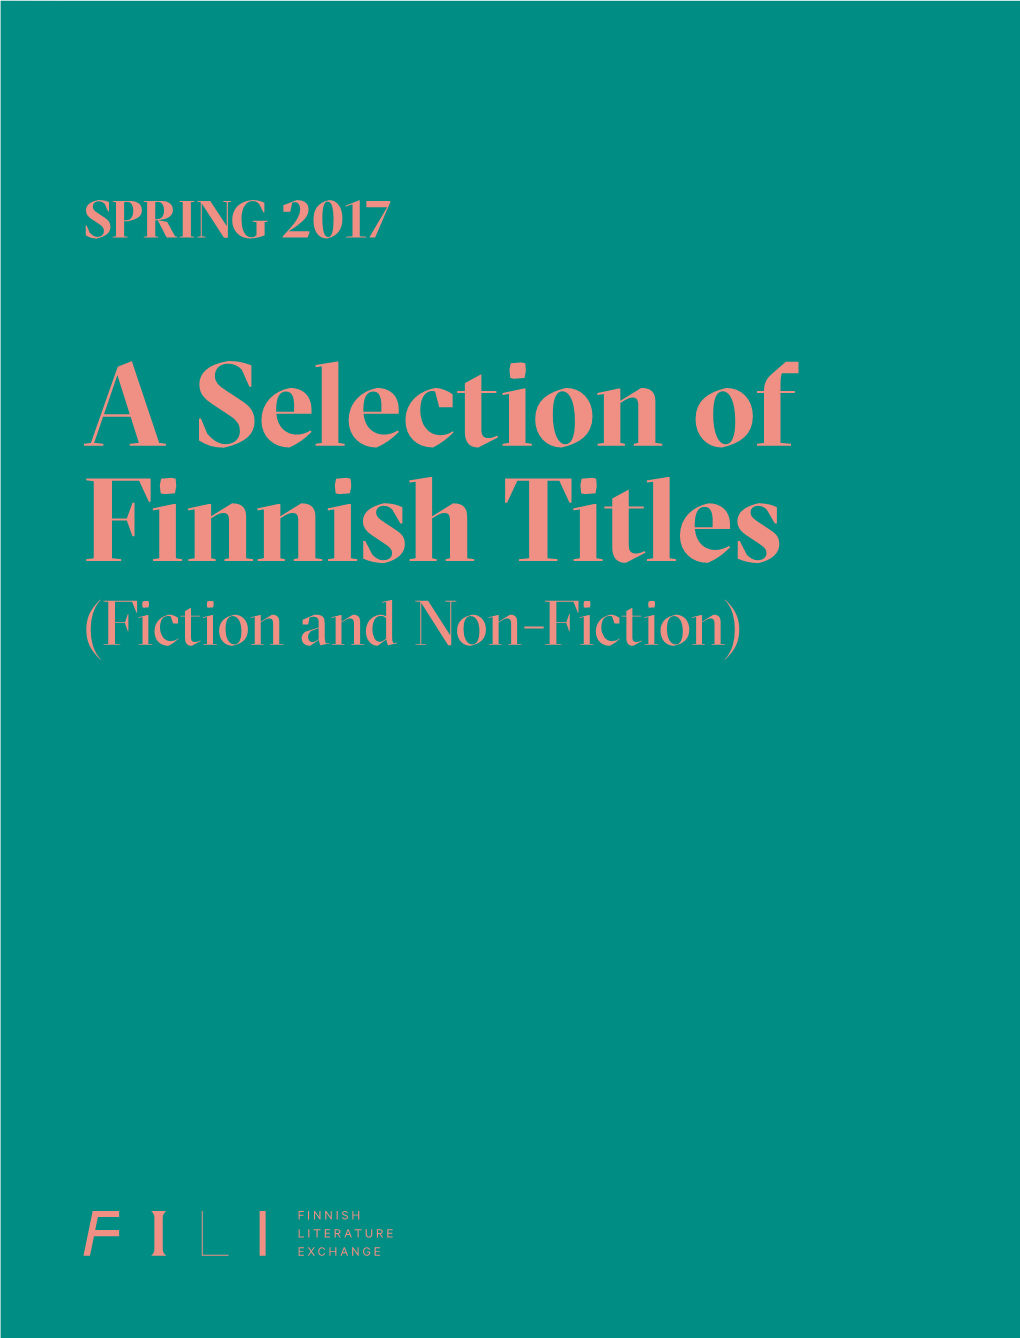 Spring 2017: a Selection of Finnish Titles (Fiction and Non-Fiction) (Pdf)